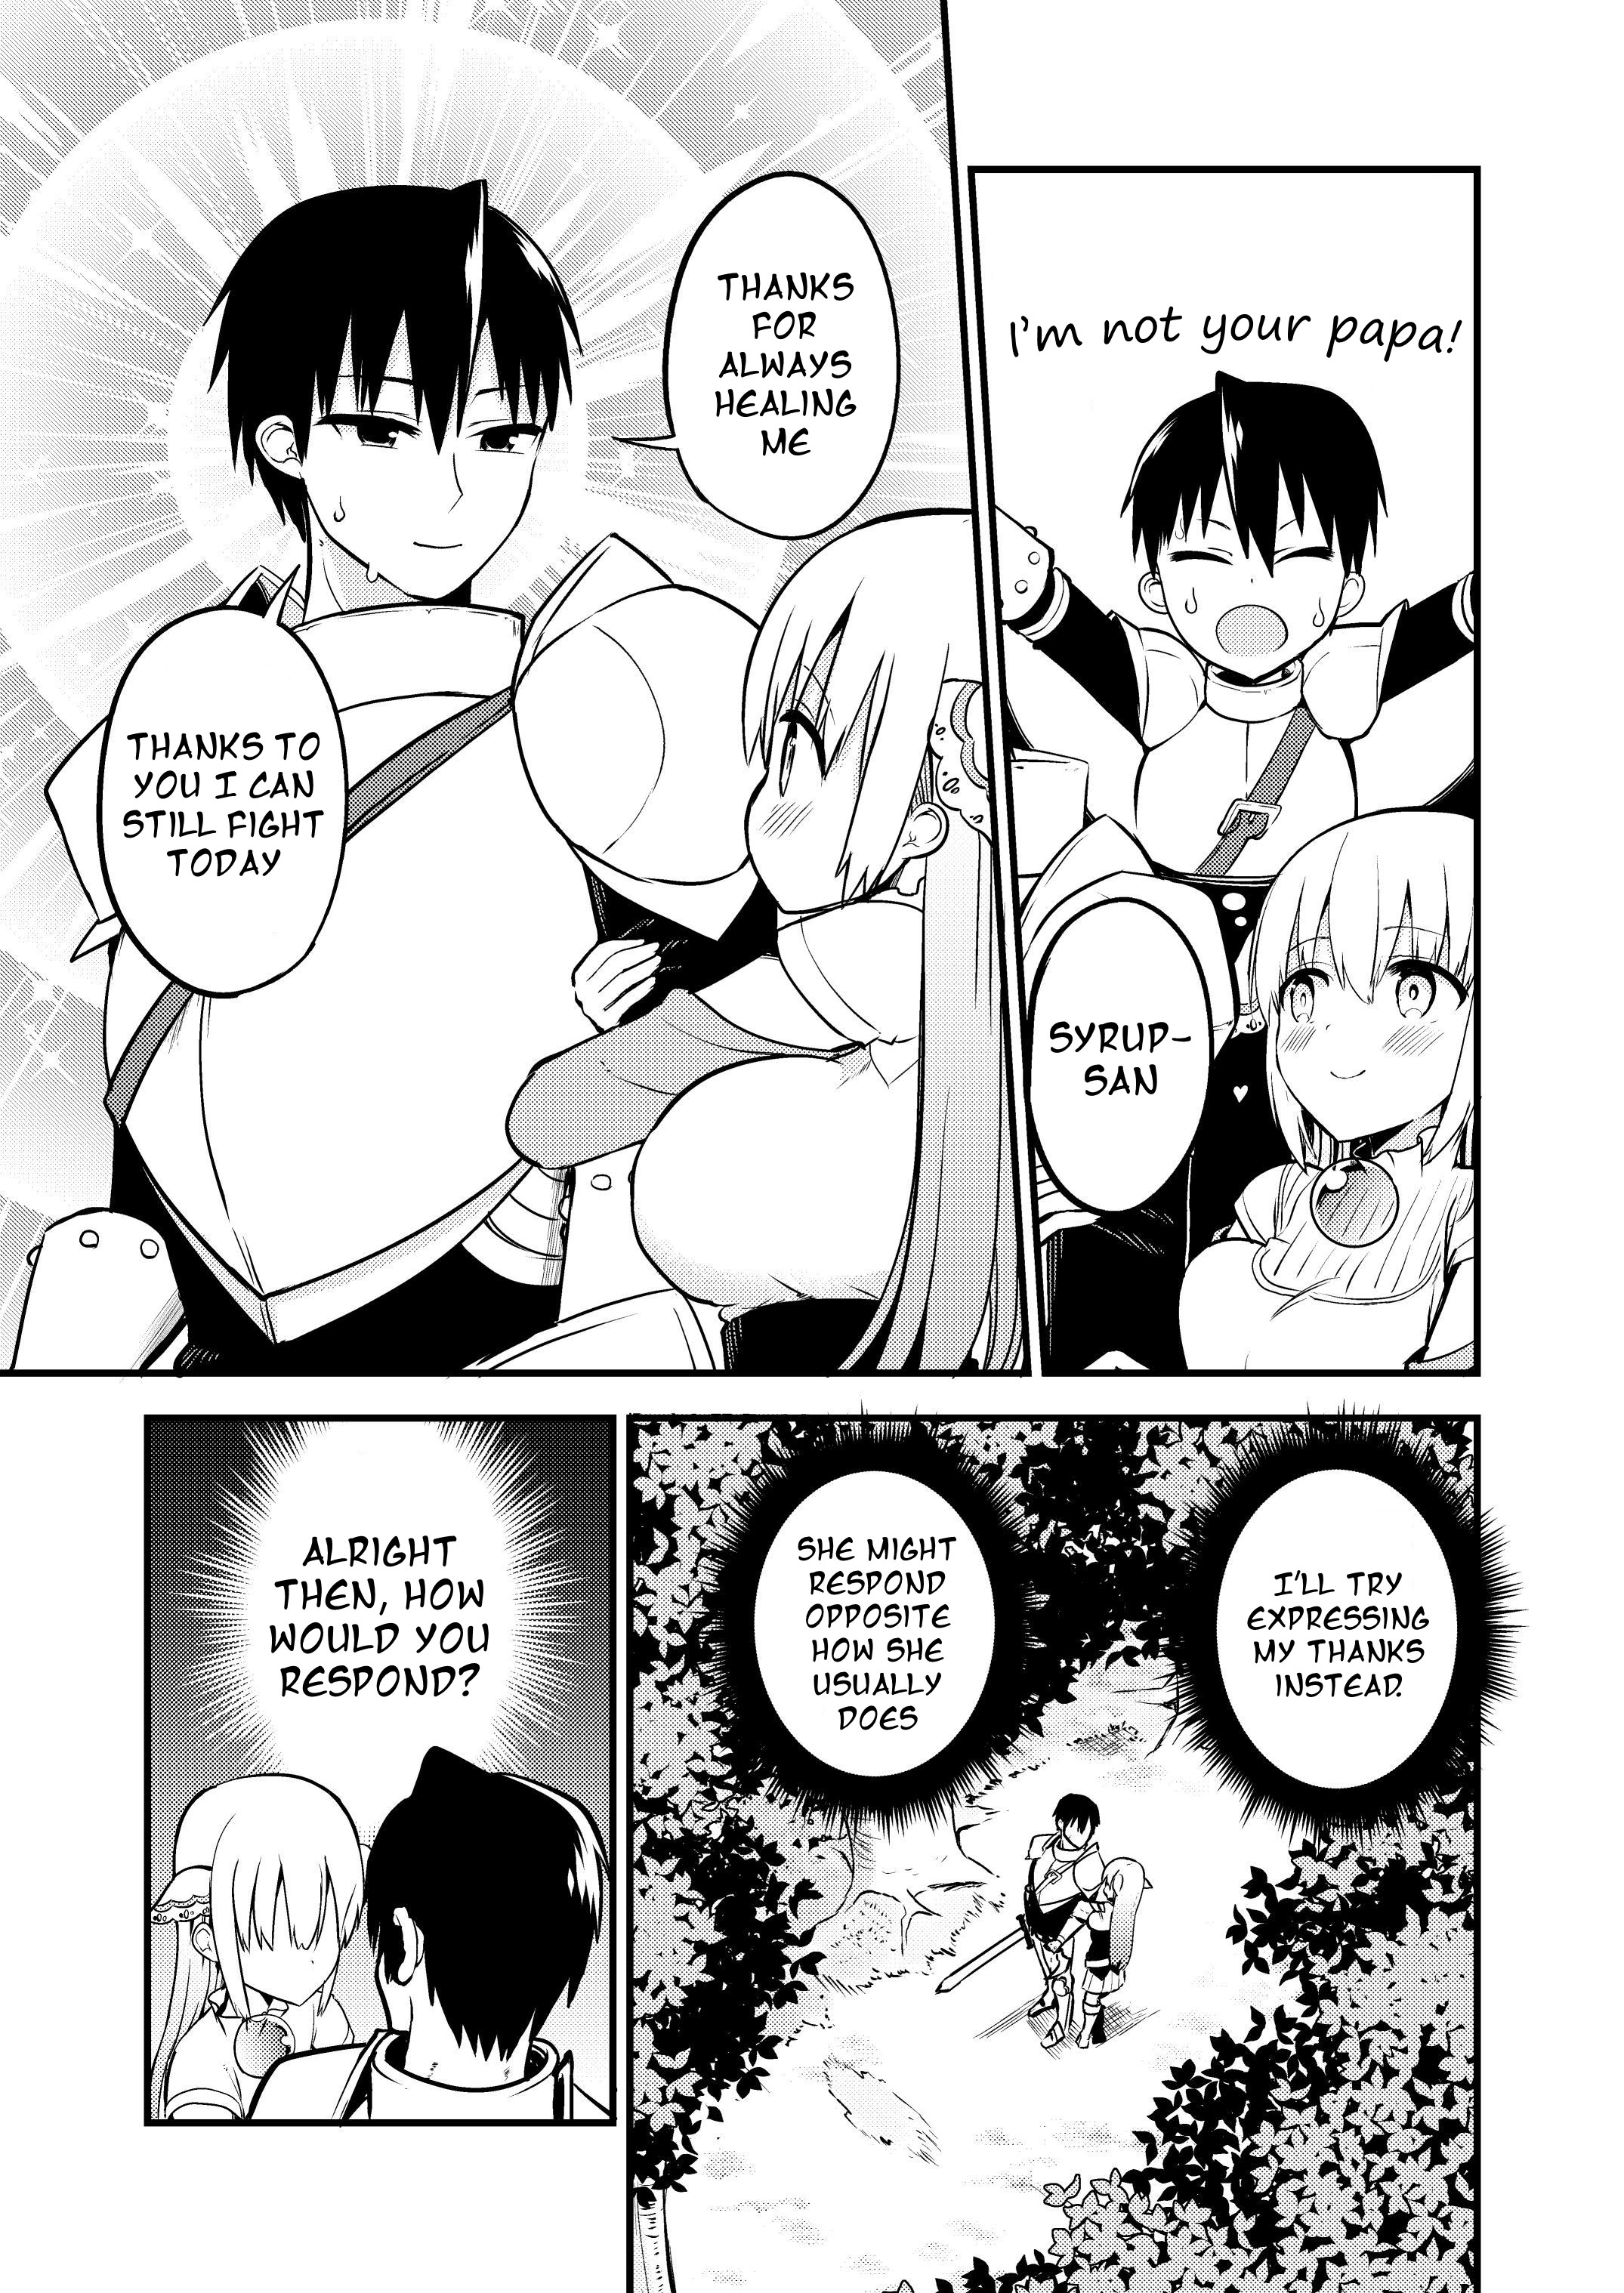 Shiro Madoushi Syrup-San Vol.1 Chapter 29: White Mage Syrup-San And Responses - Picture 3